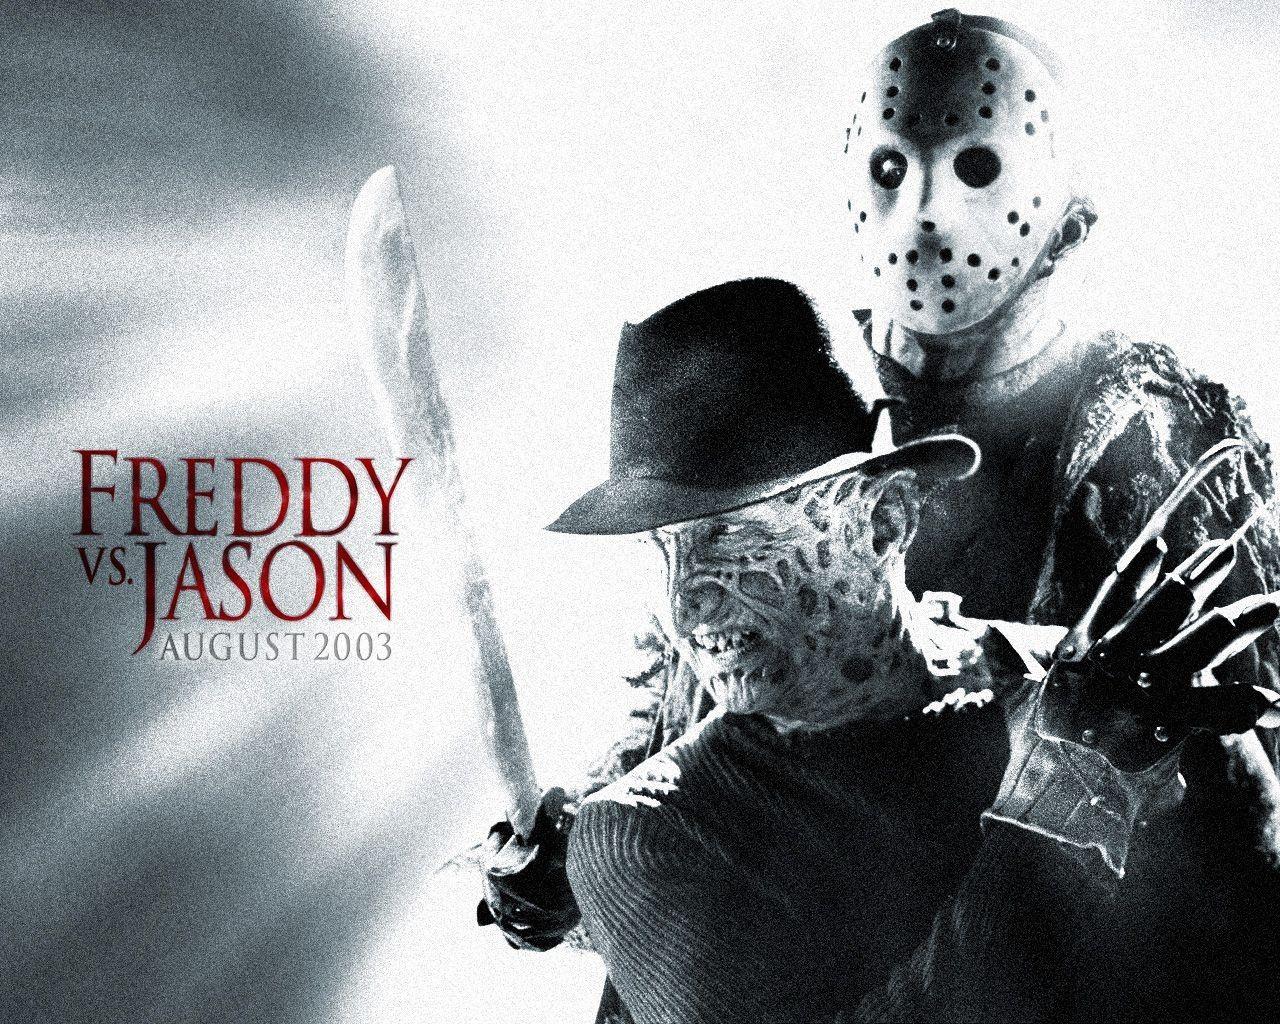 Freddy vs. Jason image Death Match HD wallpaper and background